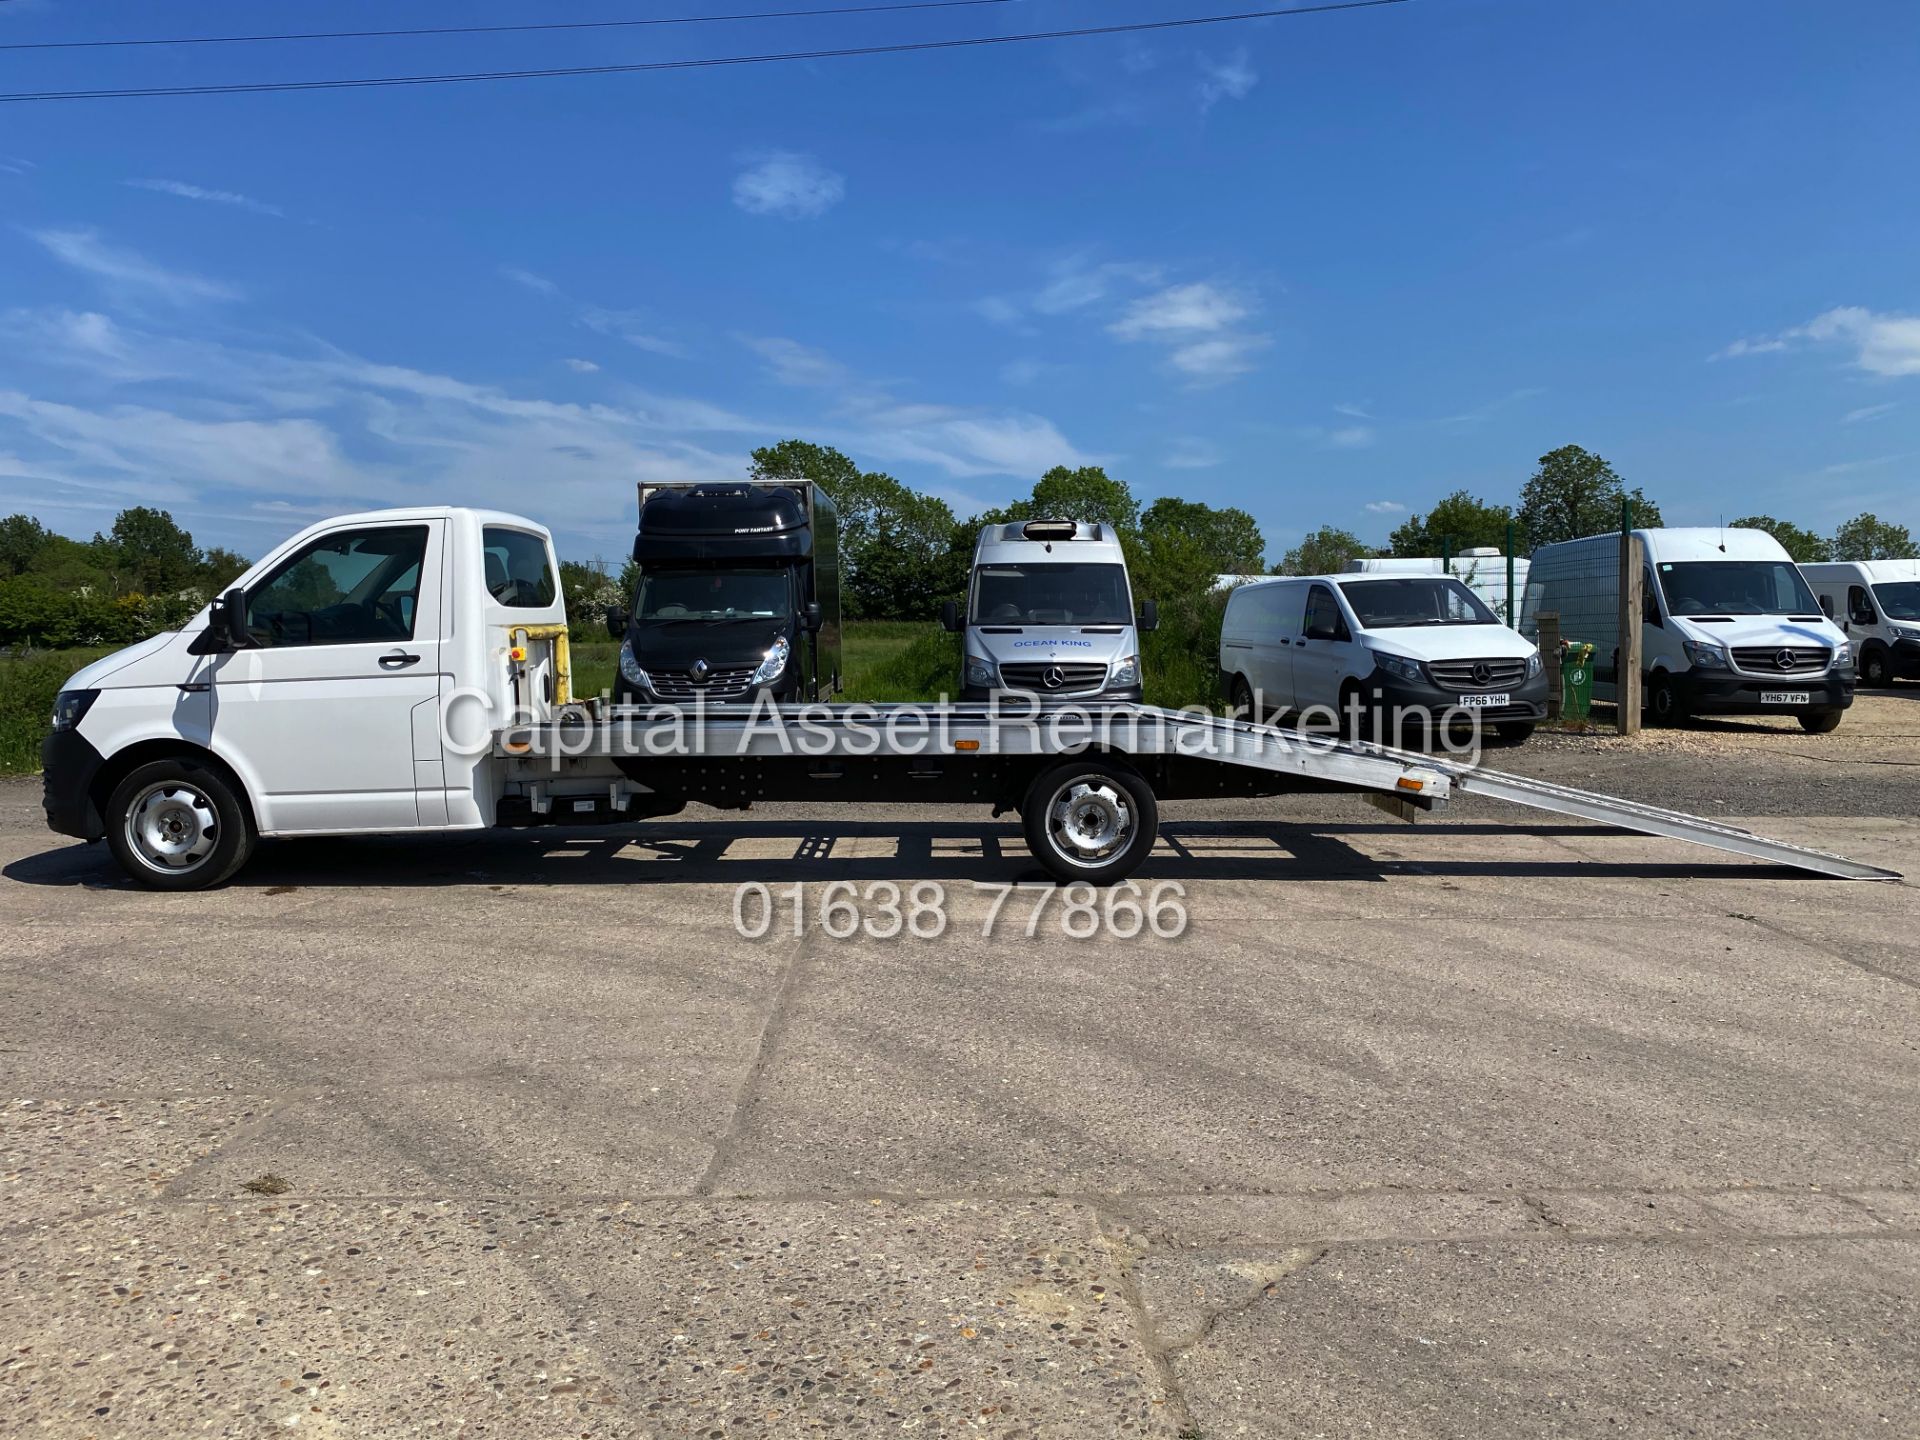 VOLKSWAGEN TRANSPORTER T6 2.0TDI "140" LWB CAR TRANSPORTER / RECOVERY TRUCK- 18 REG - AIR CON - WOW! - Image 11 of 25